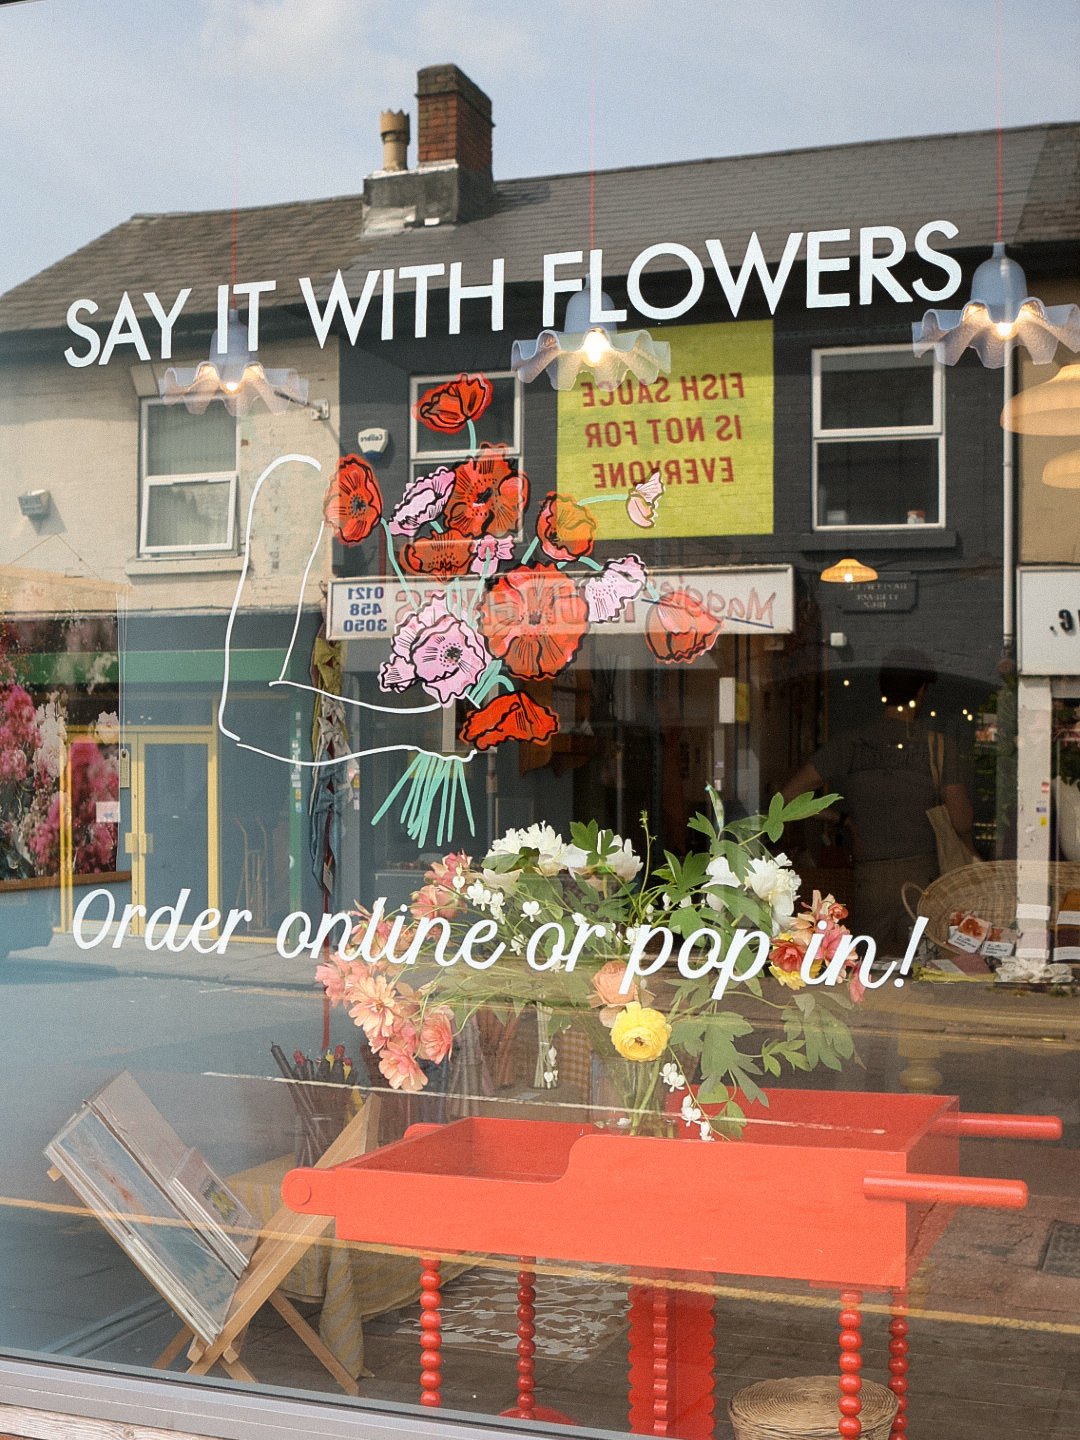 This is your weekly reminder to SAY IT WITH FLOWERS, we have them in the bucket loads! Pop in today or order online 💐